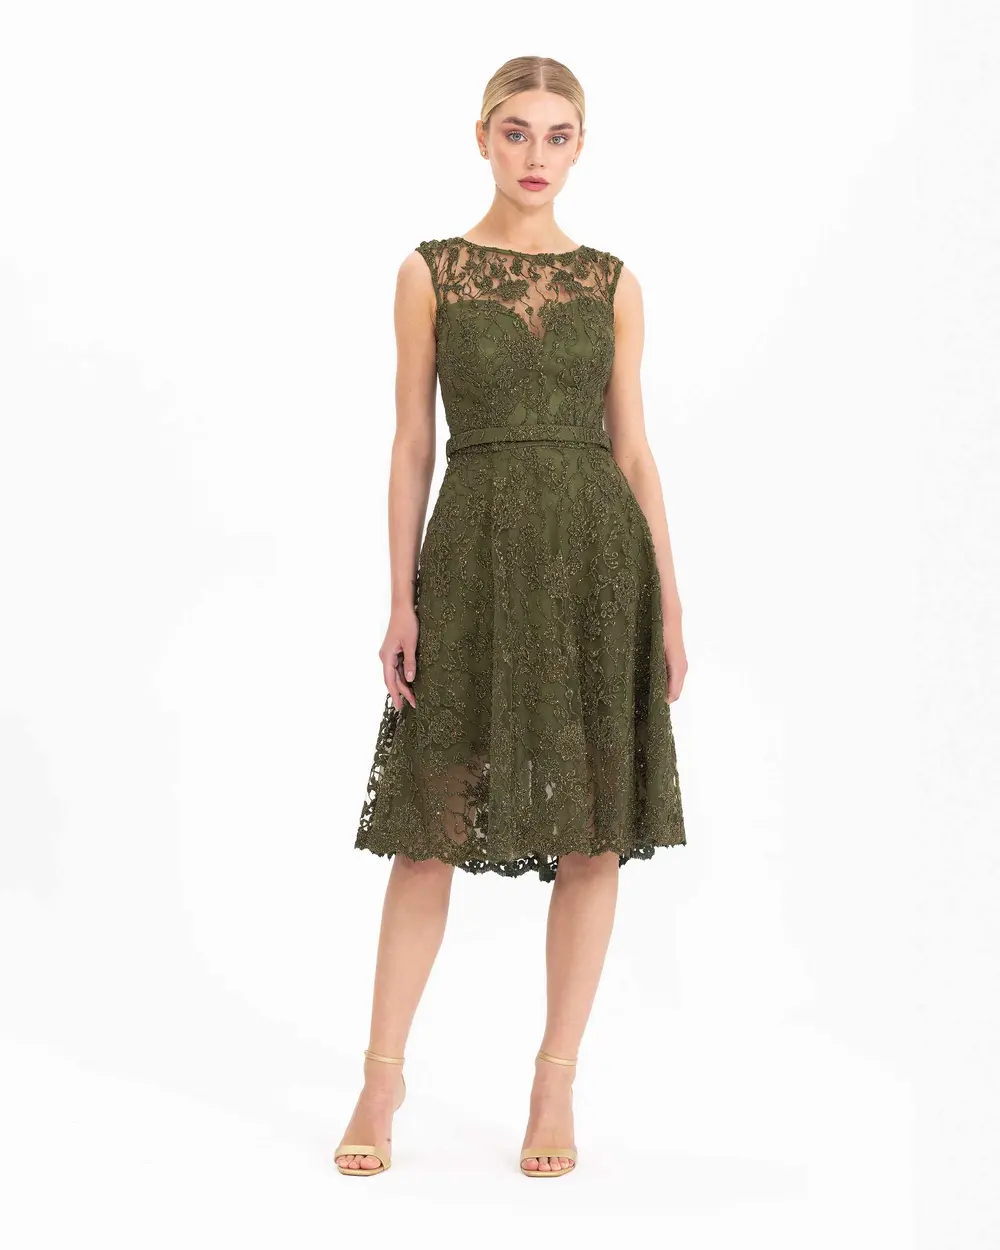 A FORM EMBROIDERED TULLE EVENING DRESS